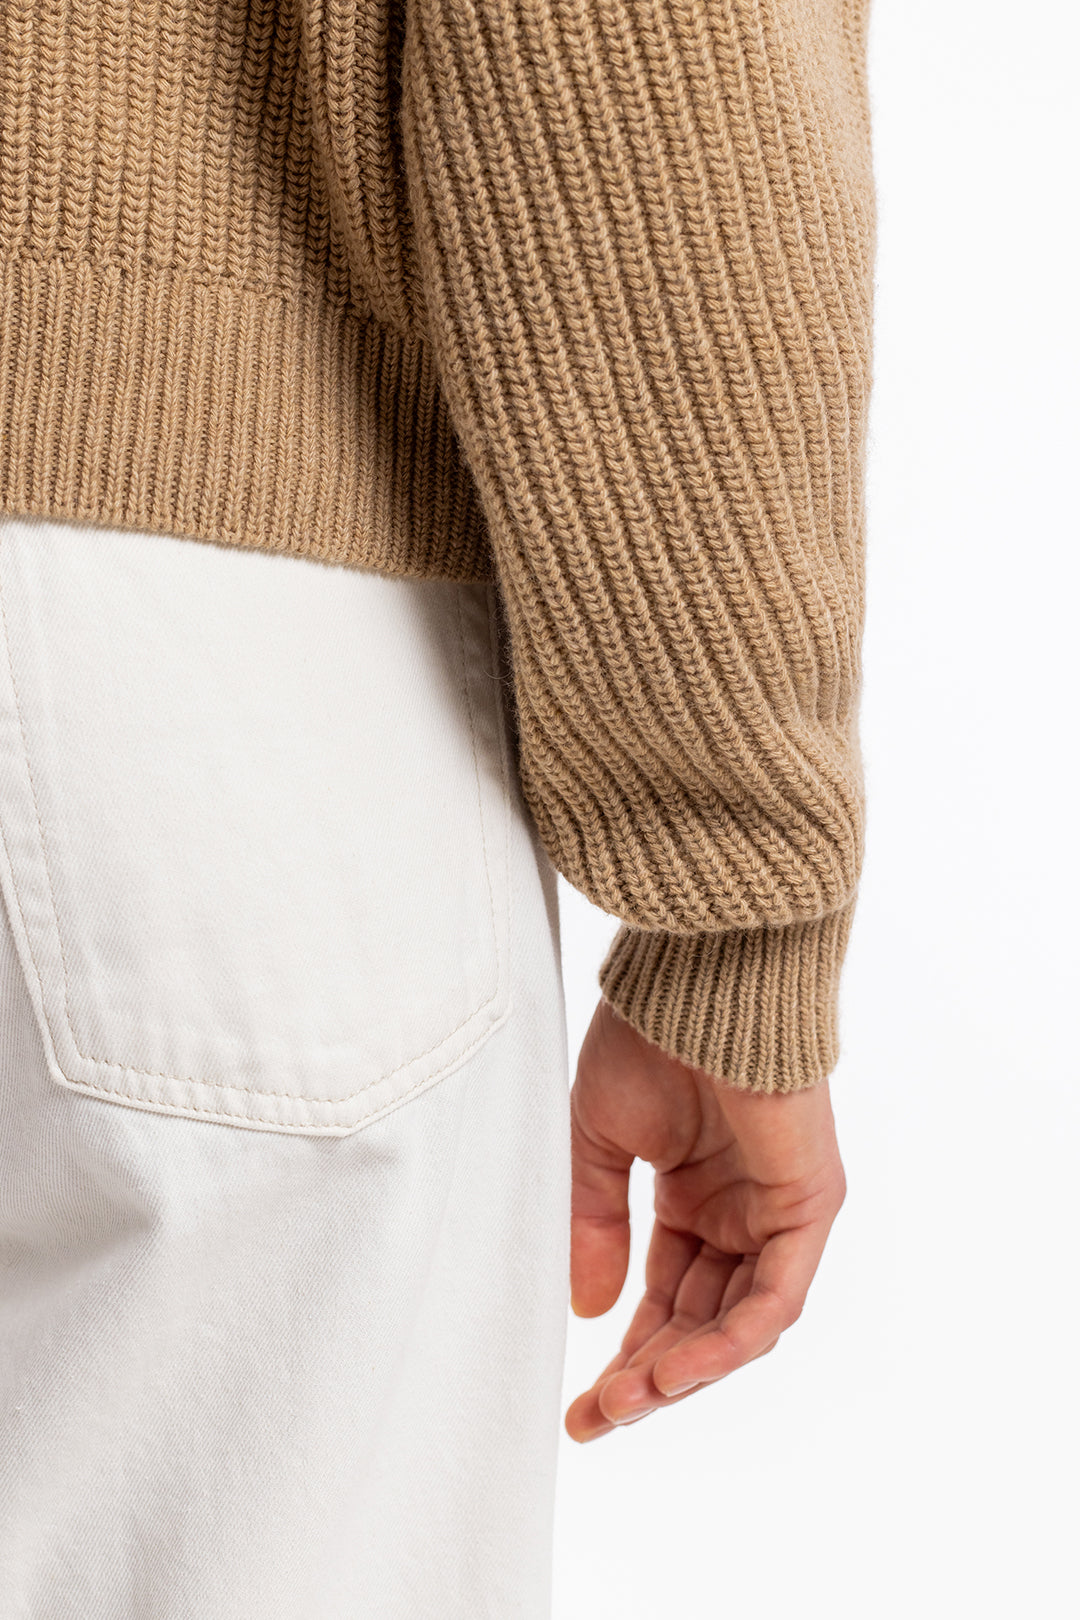 Beige knitted sweater made from recycled wool from Rotholz